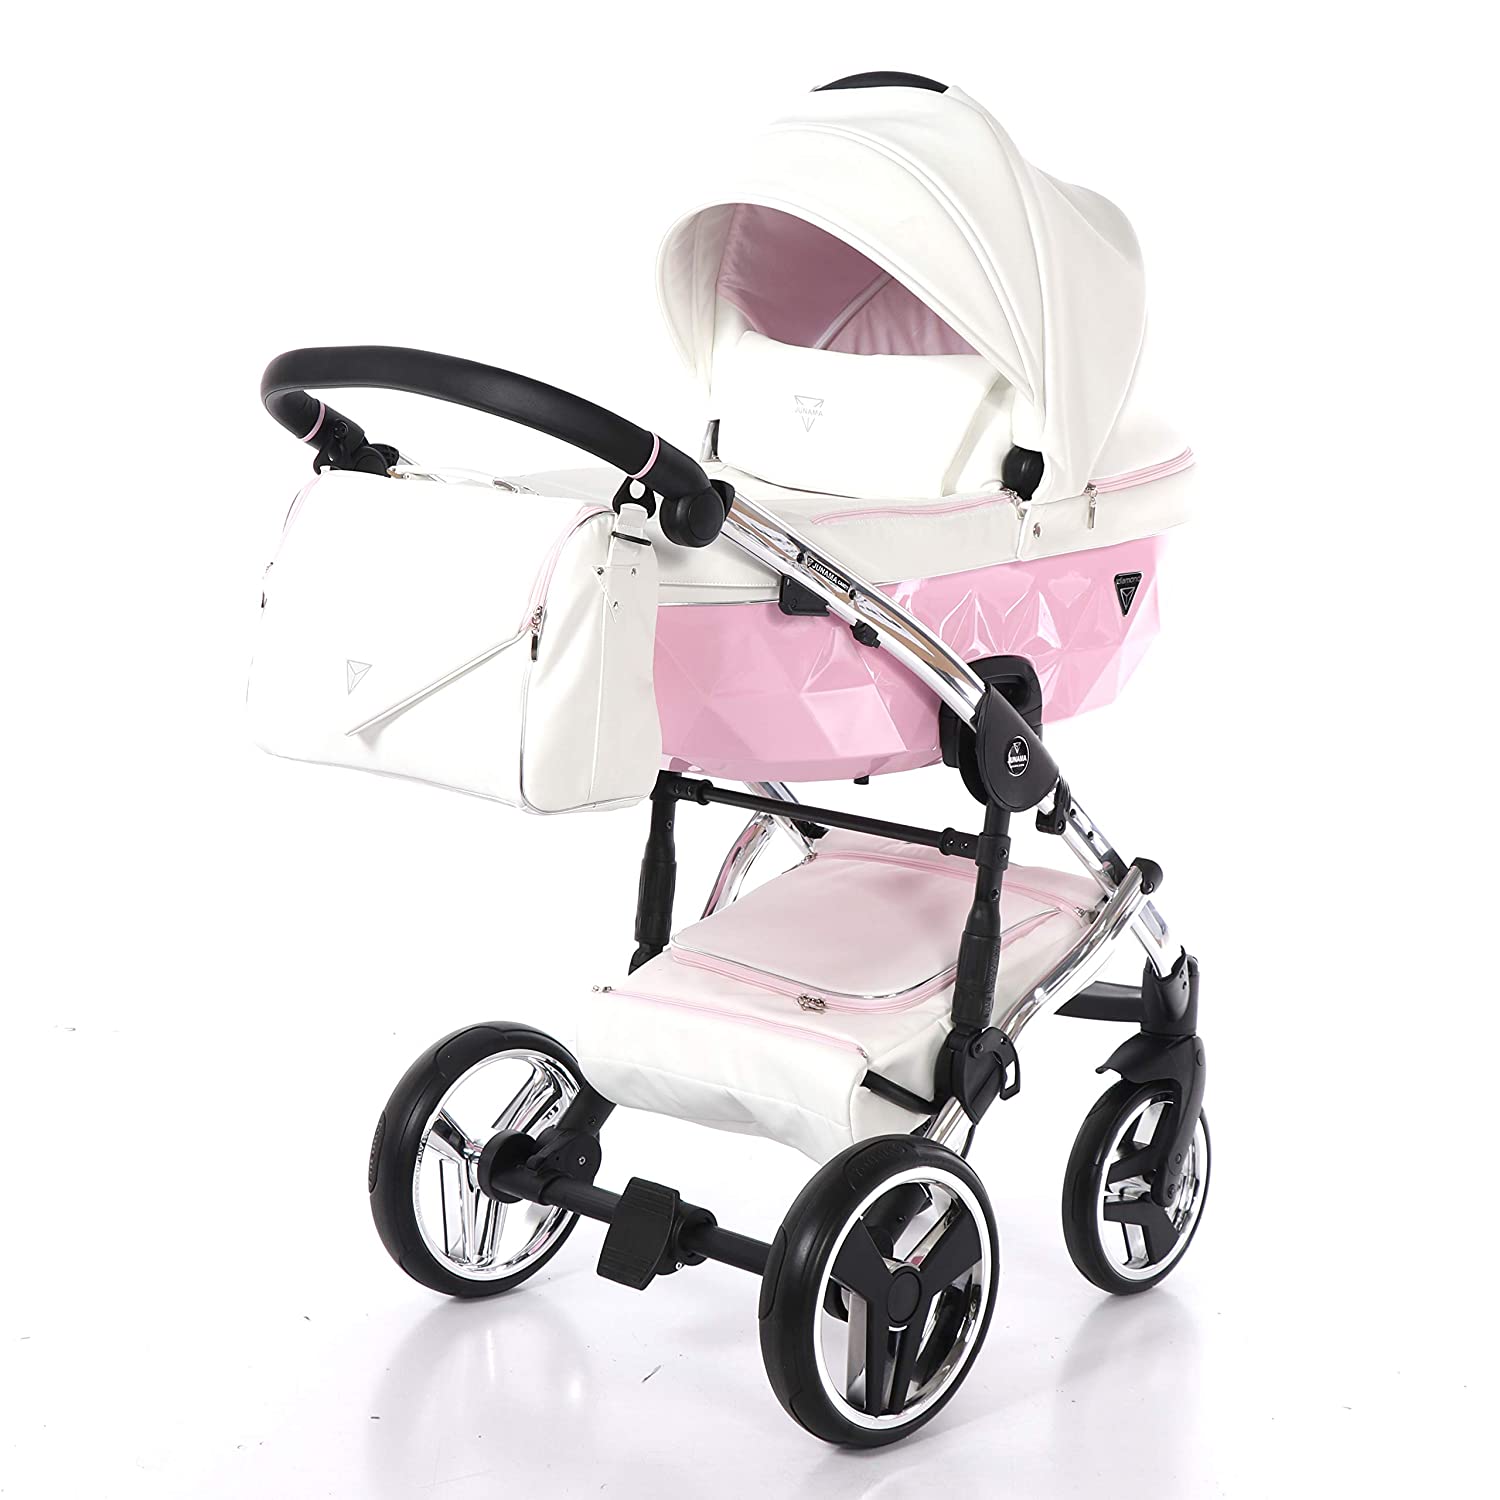 Combi Children\'s Pram Set JUNAMA CANDY Pushchair Buggy Baby Seat + Accessories (Junama Candy 01 White Leather - Pink, 3-in-1)